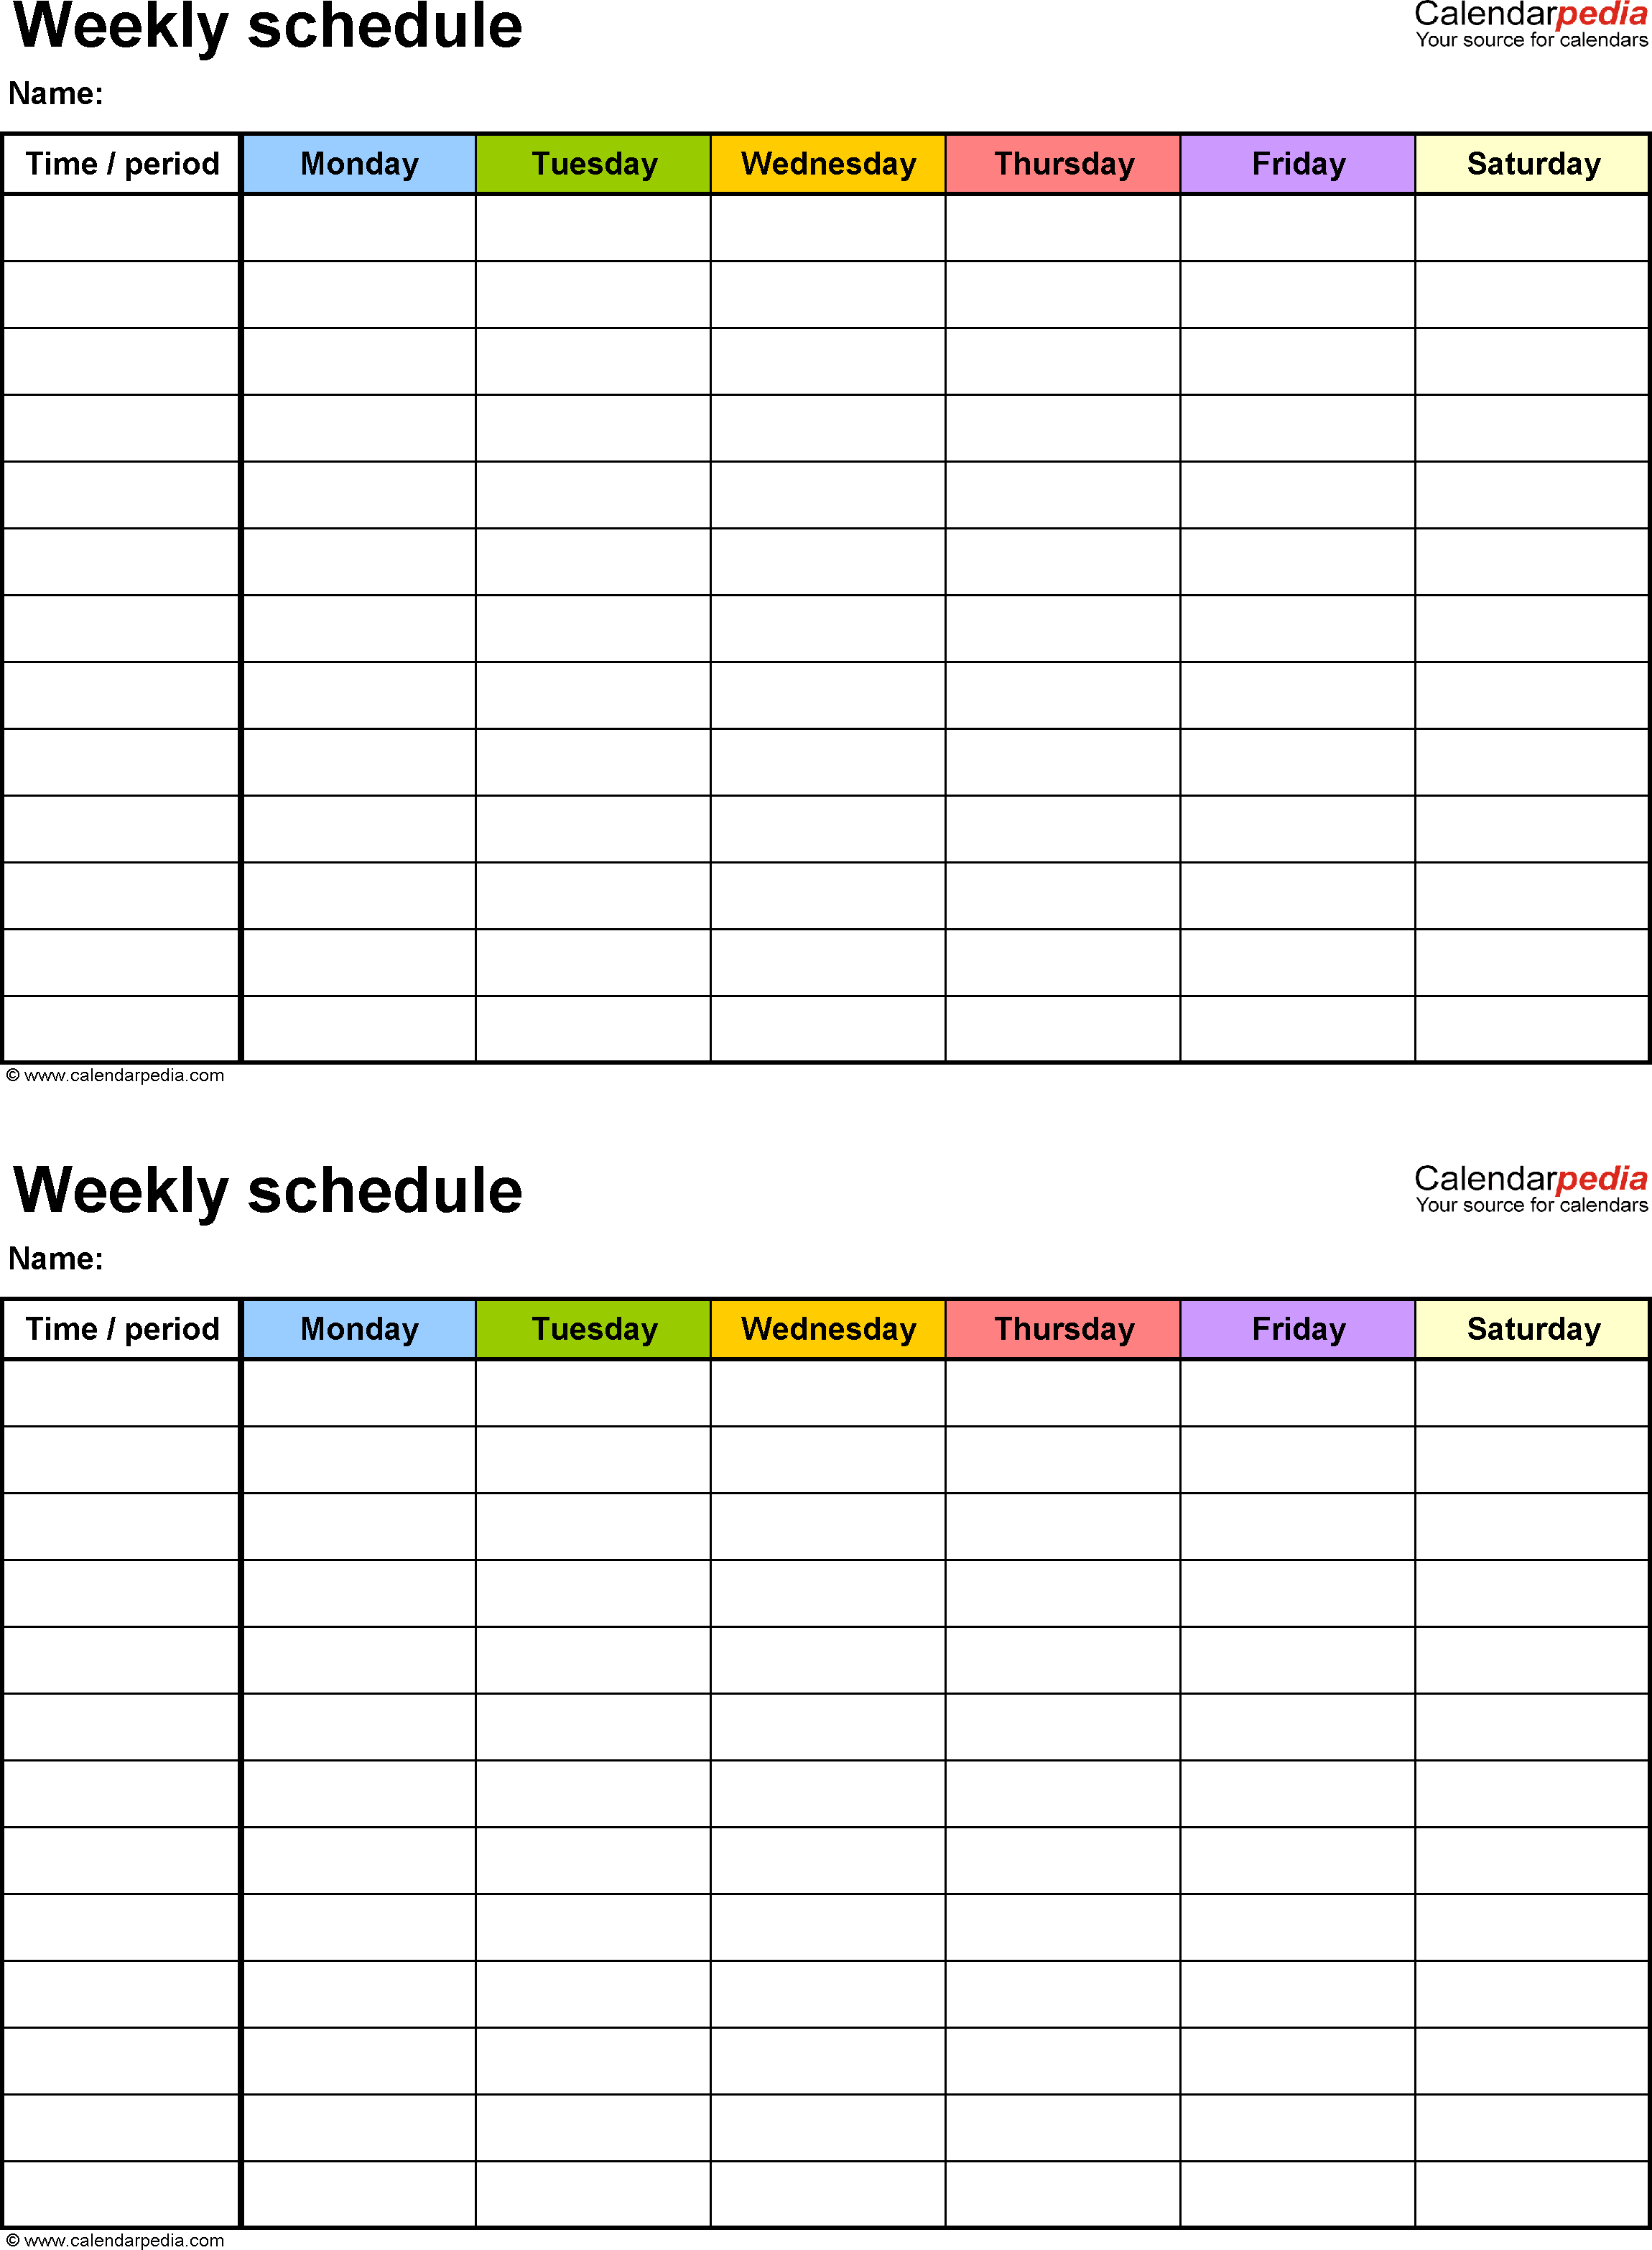 Free Weekly Schedule Templates For Pdf - 18 Templates - Free Printable Blank Weekly Schedule